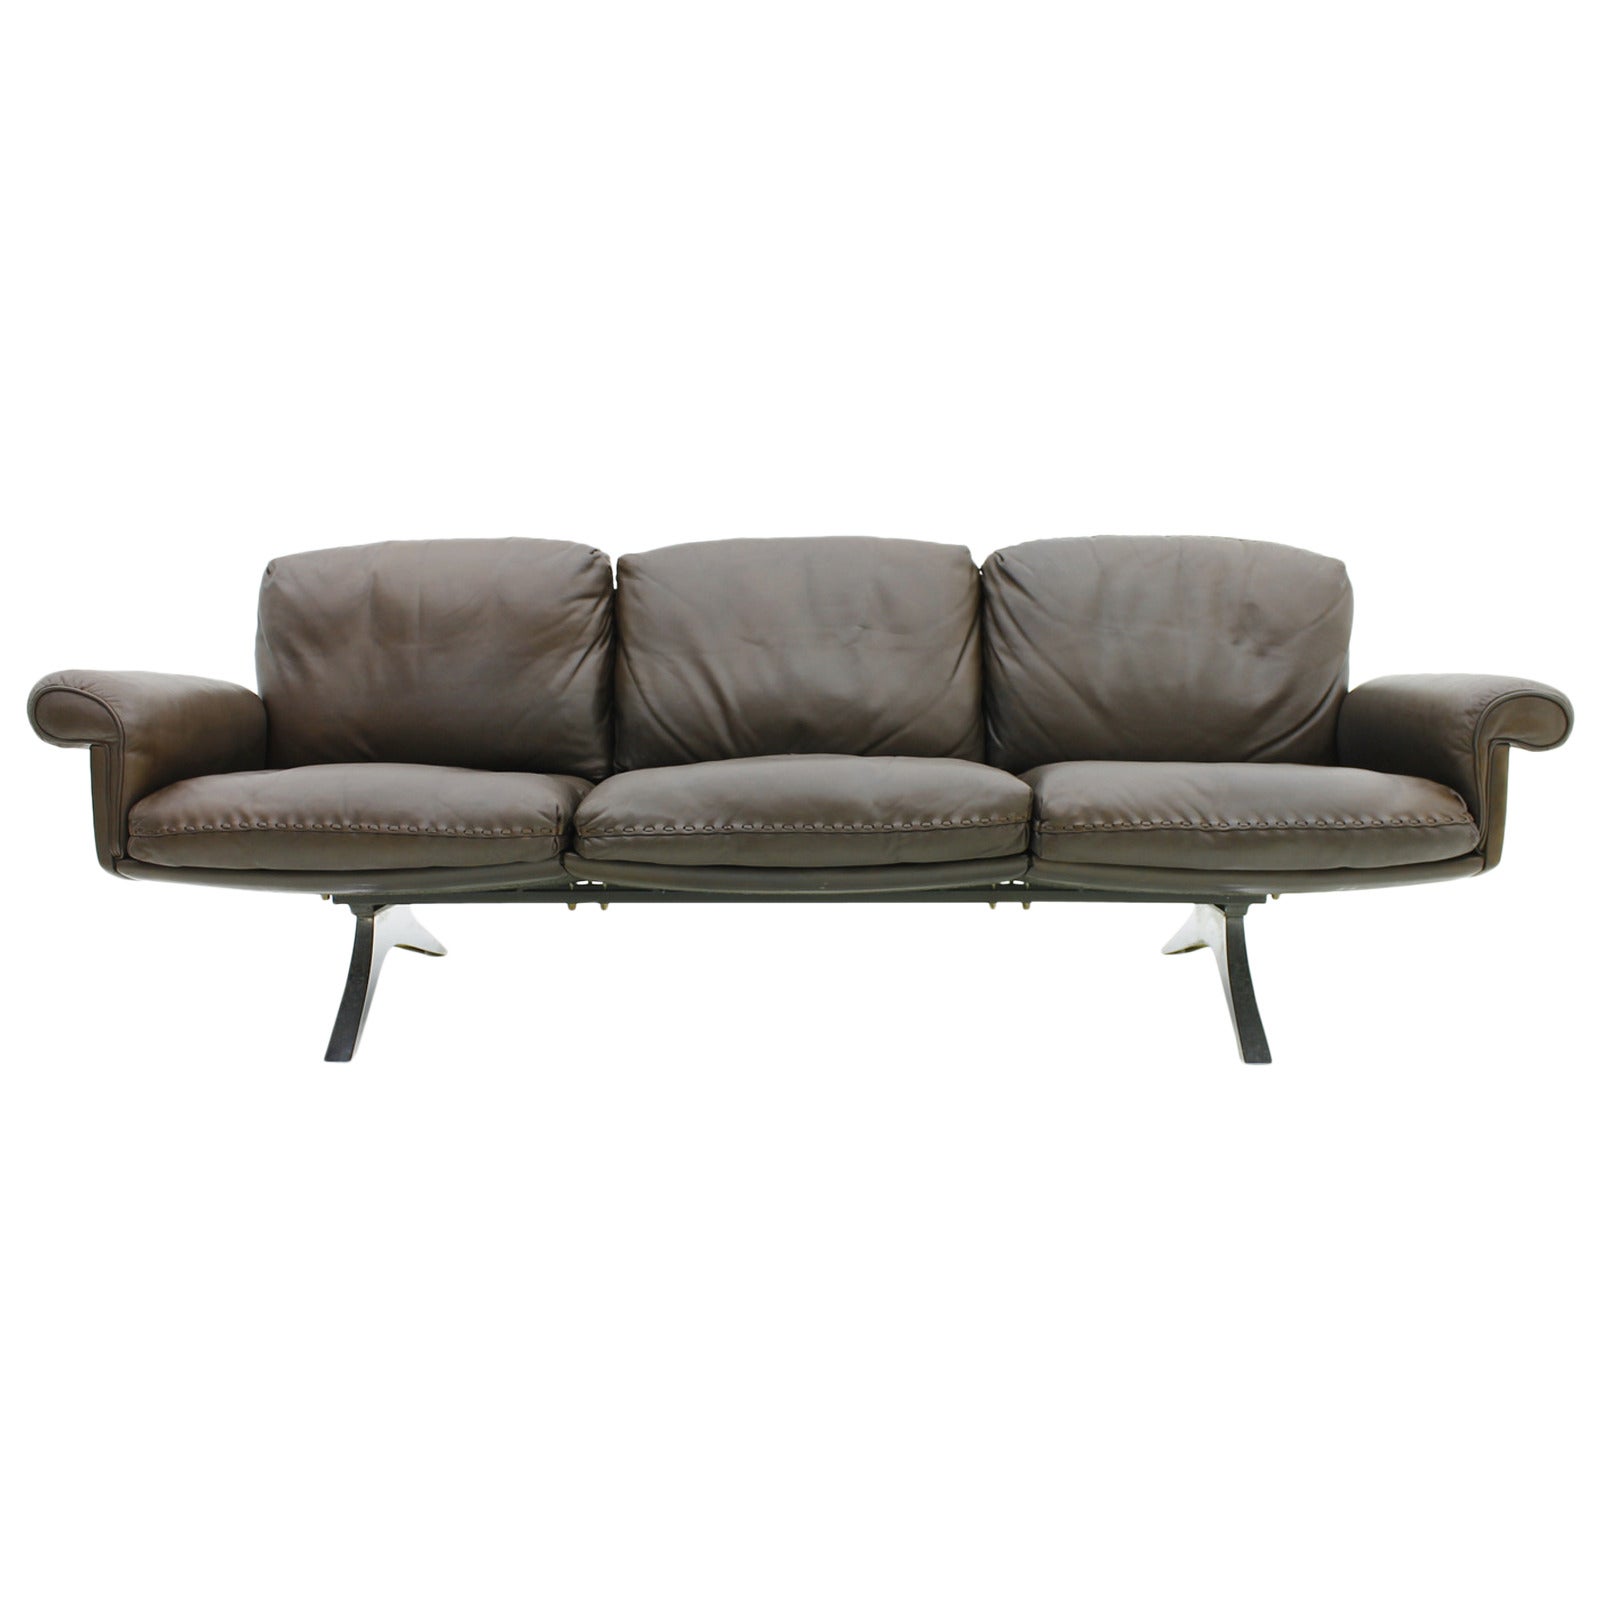 Three-Seat Leather Sofa DS-31 by De Sede Switzerland, 1960`s